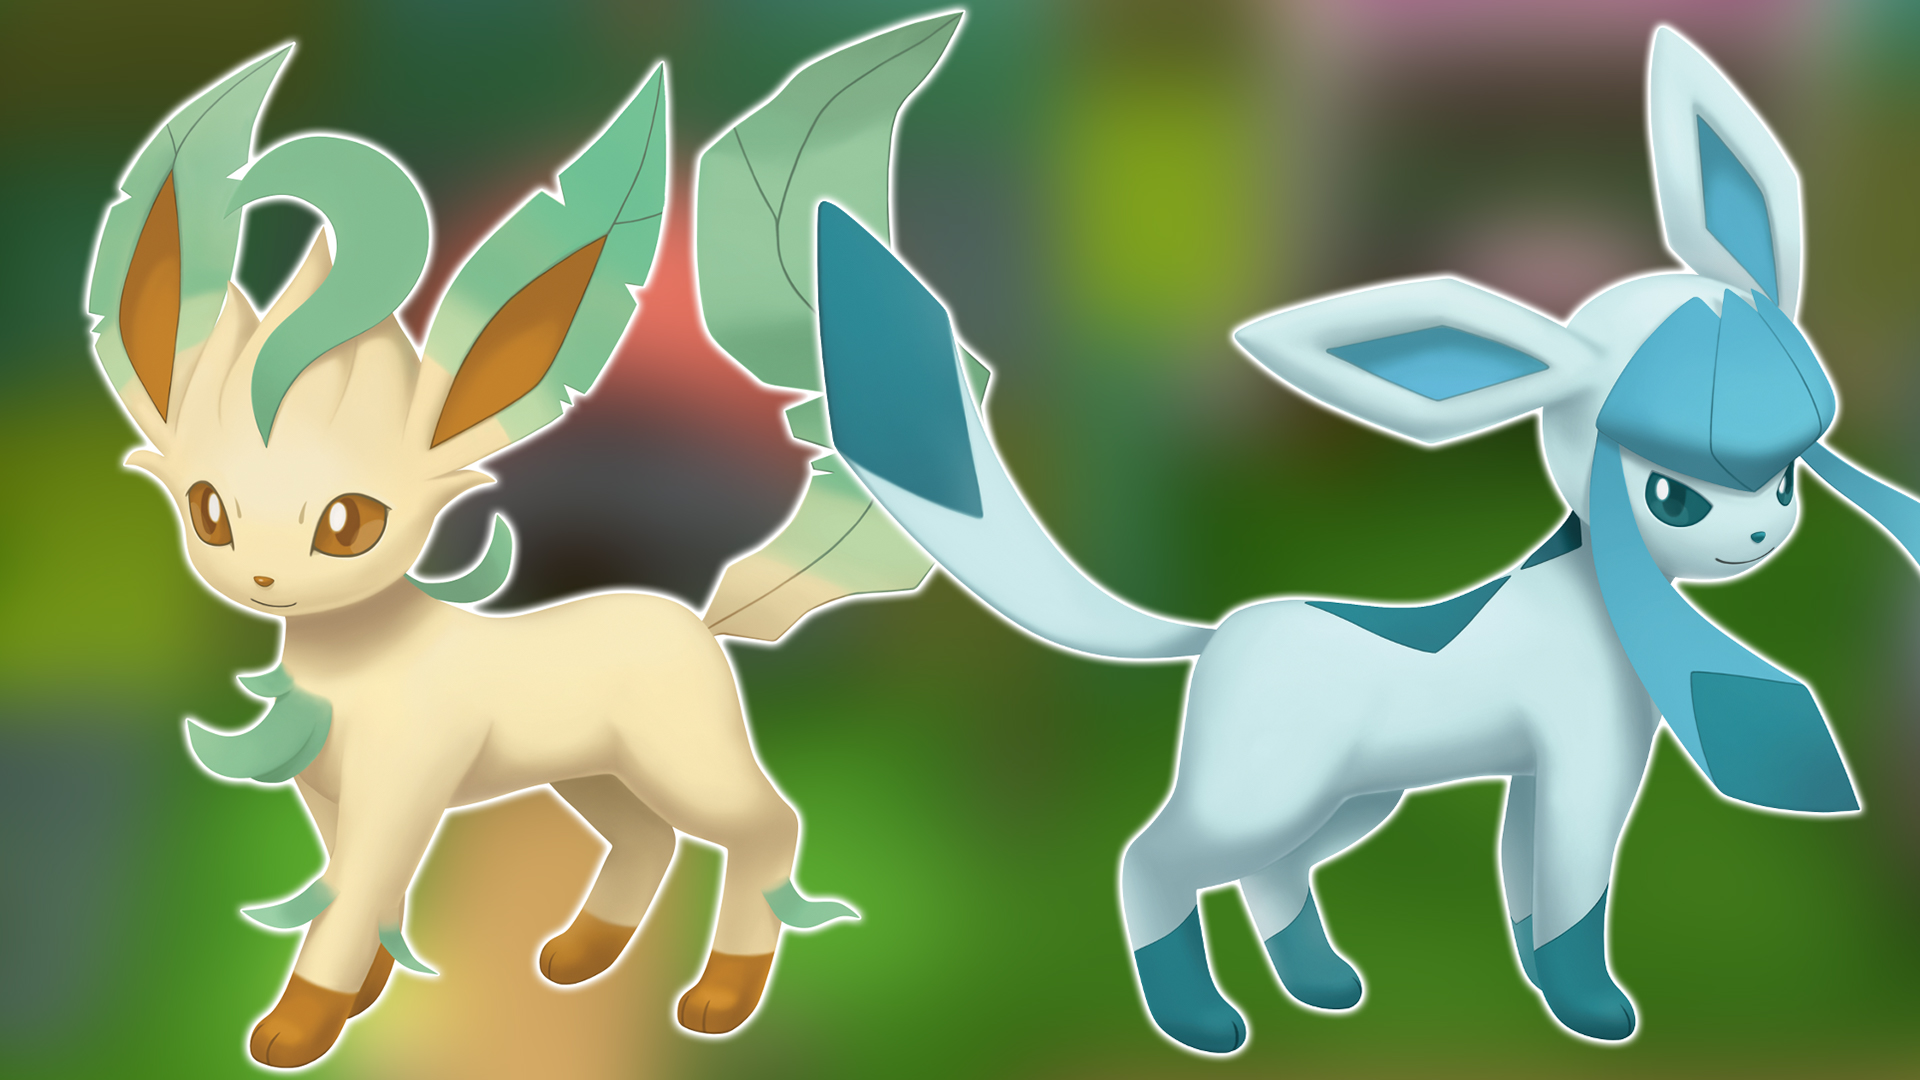 How To Evolve Eevee Into Leafeon Glaceon In Pokemon sp